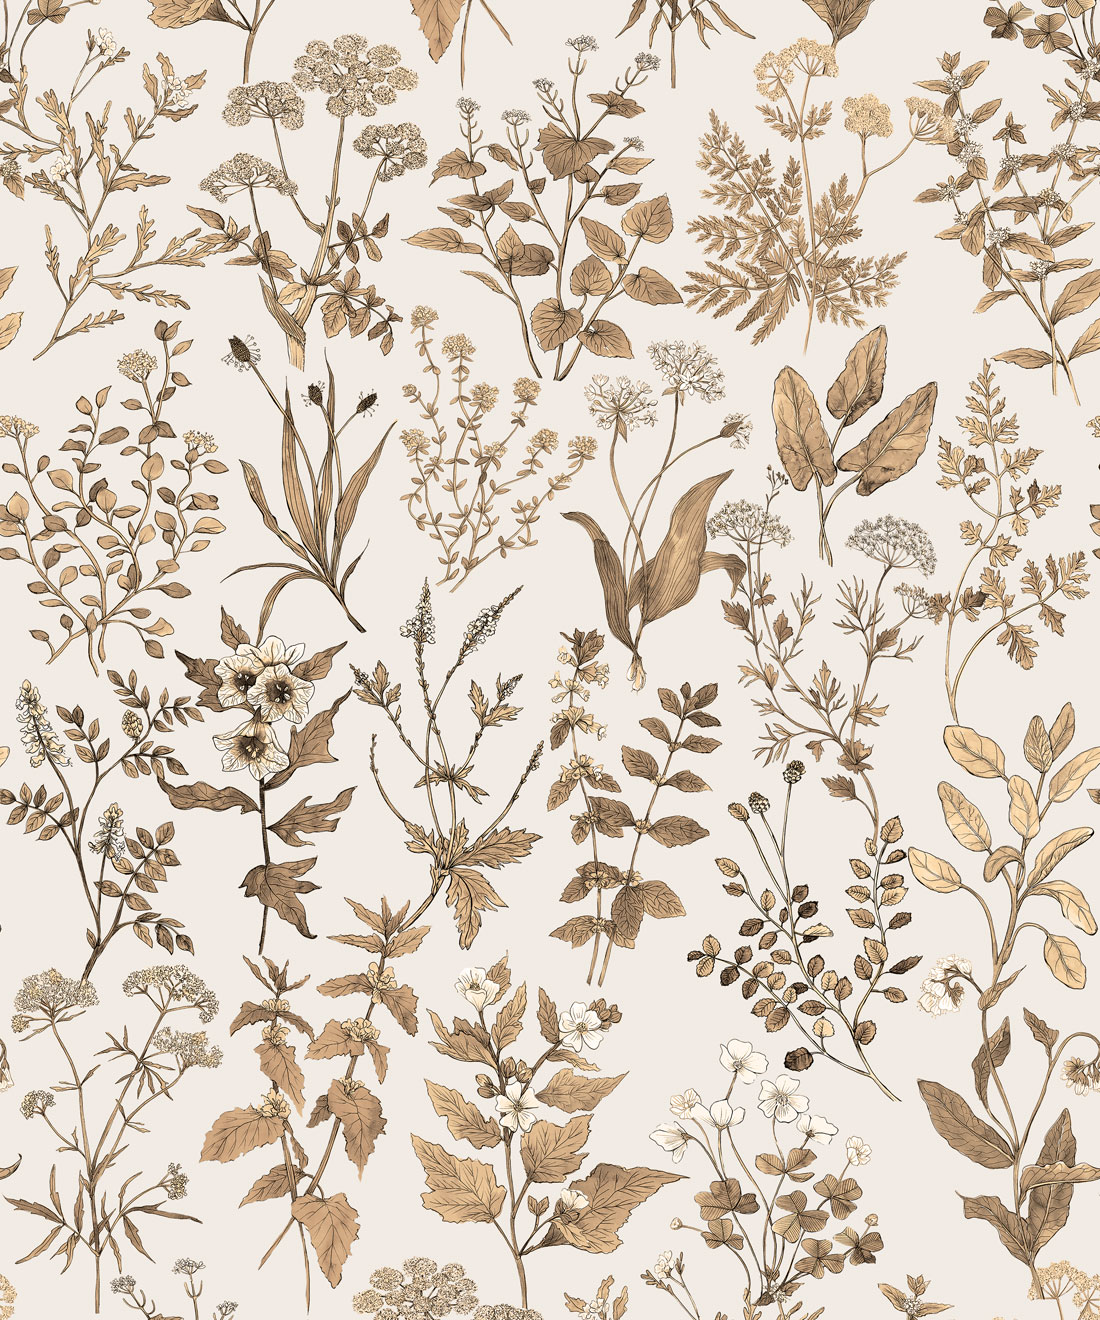 Herb Antique Wallpaper • Hackney & Co. • Stone • Swatch